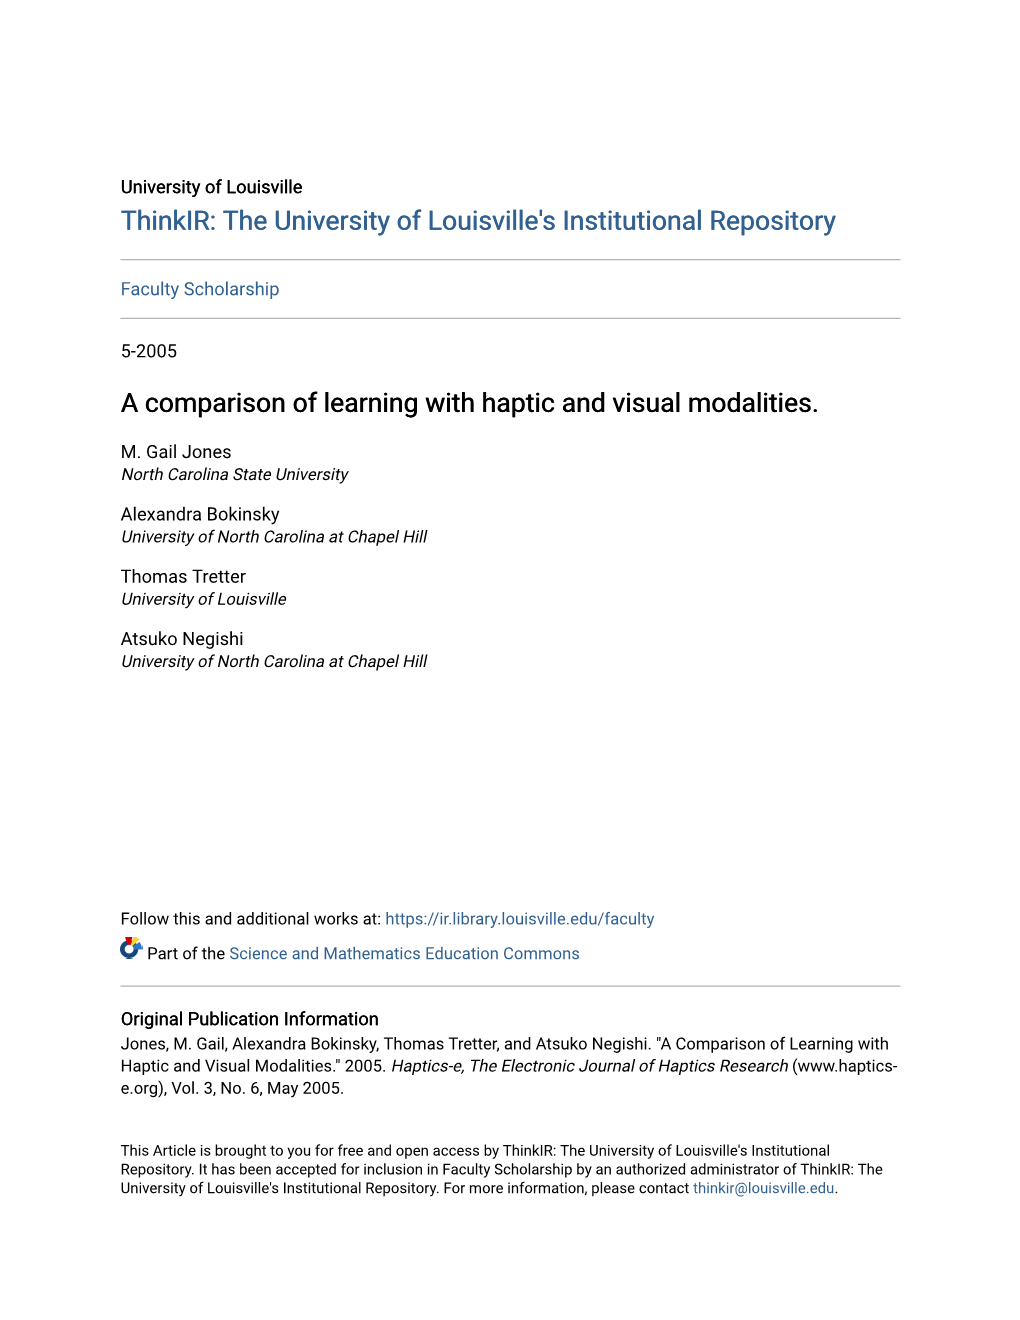 A Comparison of Learning with Haptic and Visual Modalities